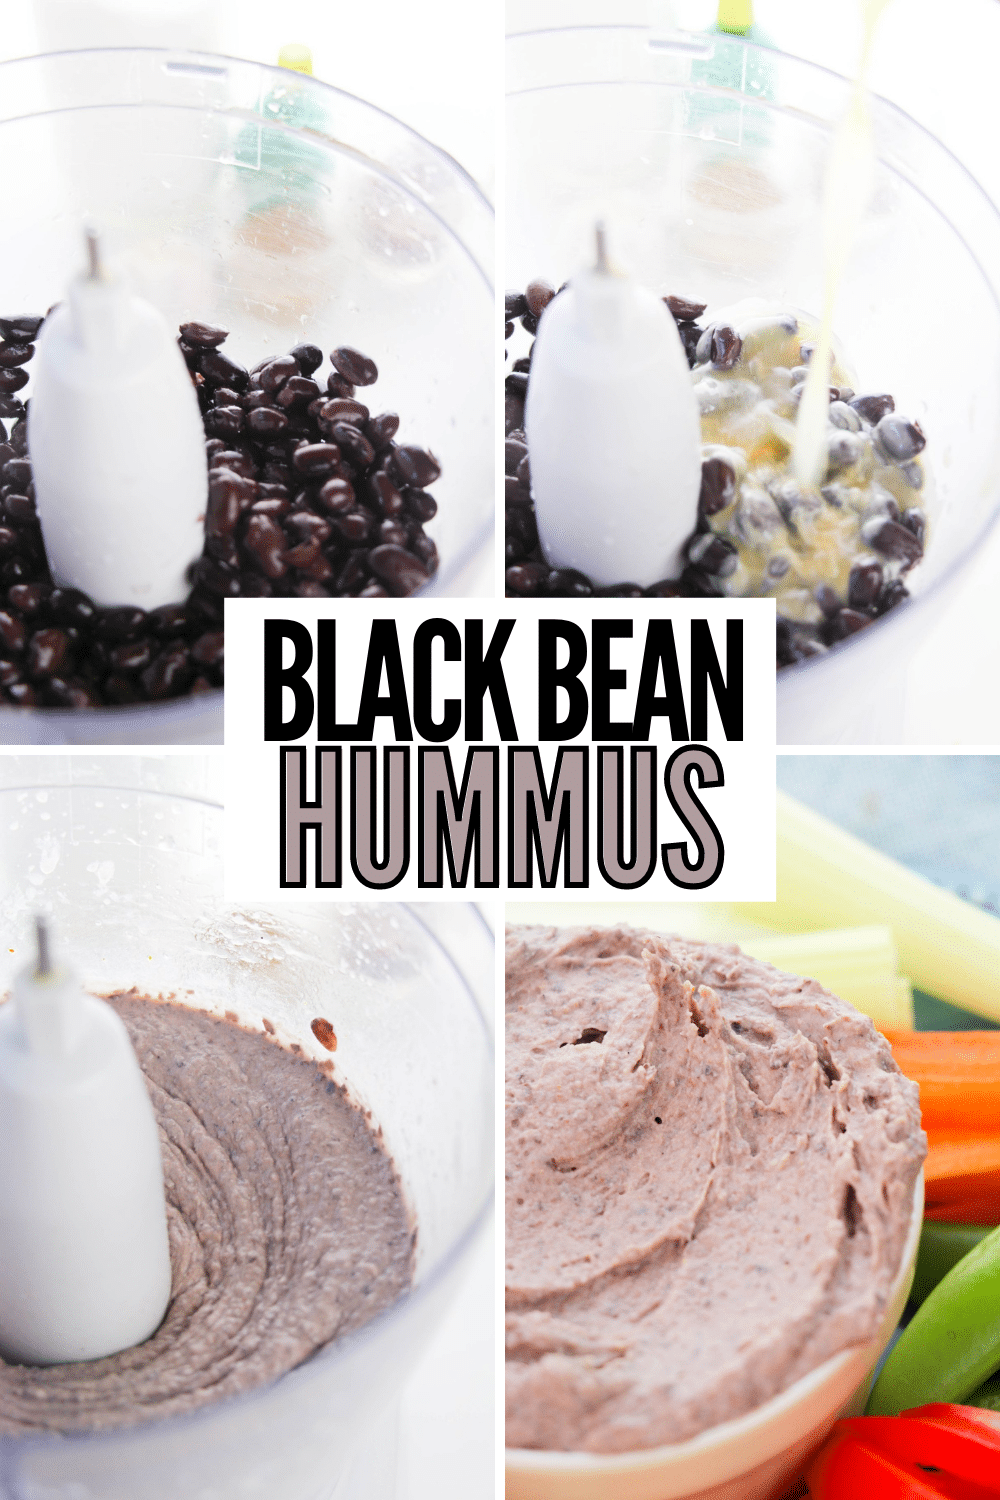 Black Bean Hummus is a fast and easy recipe with just 7 easy ingredients. Wait till you taste the flavor! So simple and delicious! #blackbeanhummus #blackbean #hummus #appetizer #recipe via @wondermomwannab